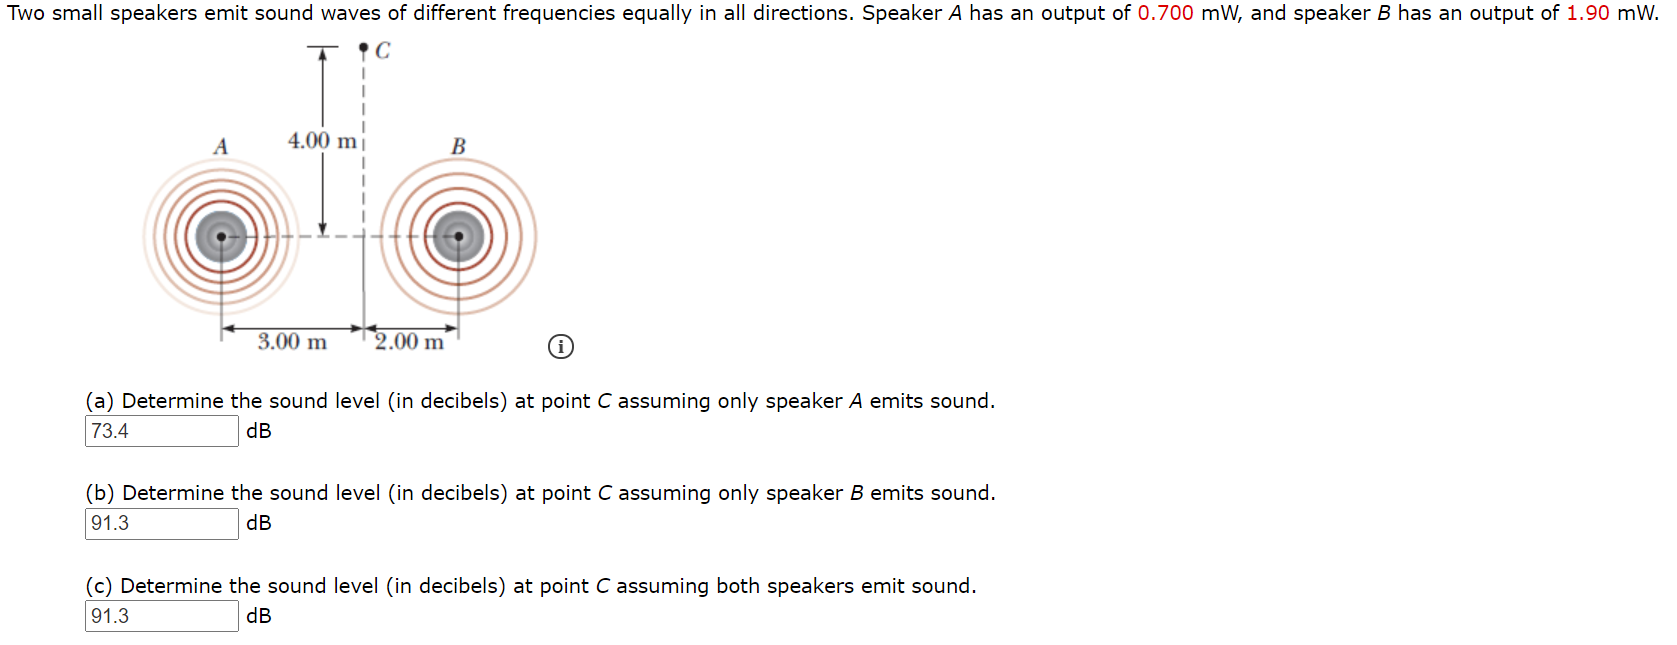 Two small speakers emit sound waves of different frequencies equally in all directions. Speaker A has an output of 0.700 mW, and speaker B has an output of 1.90 mW.
A
4.00 m|
В
3.00 m
2.00 m
(a) Determine the sound level (in decibels) at point C assuming only speaker A emits sound.
73.4
dB
(b) Determine the sound level (in decibels) at point C assuming only speaker B emits sound.
91.3
dB
(c) Determine the sound level (in decibels) at point C assuming both speakers emit sound.
91.3
dB
